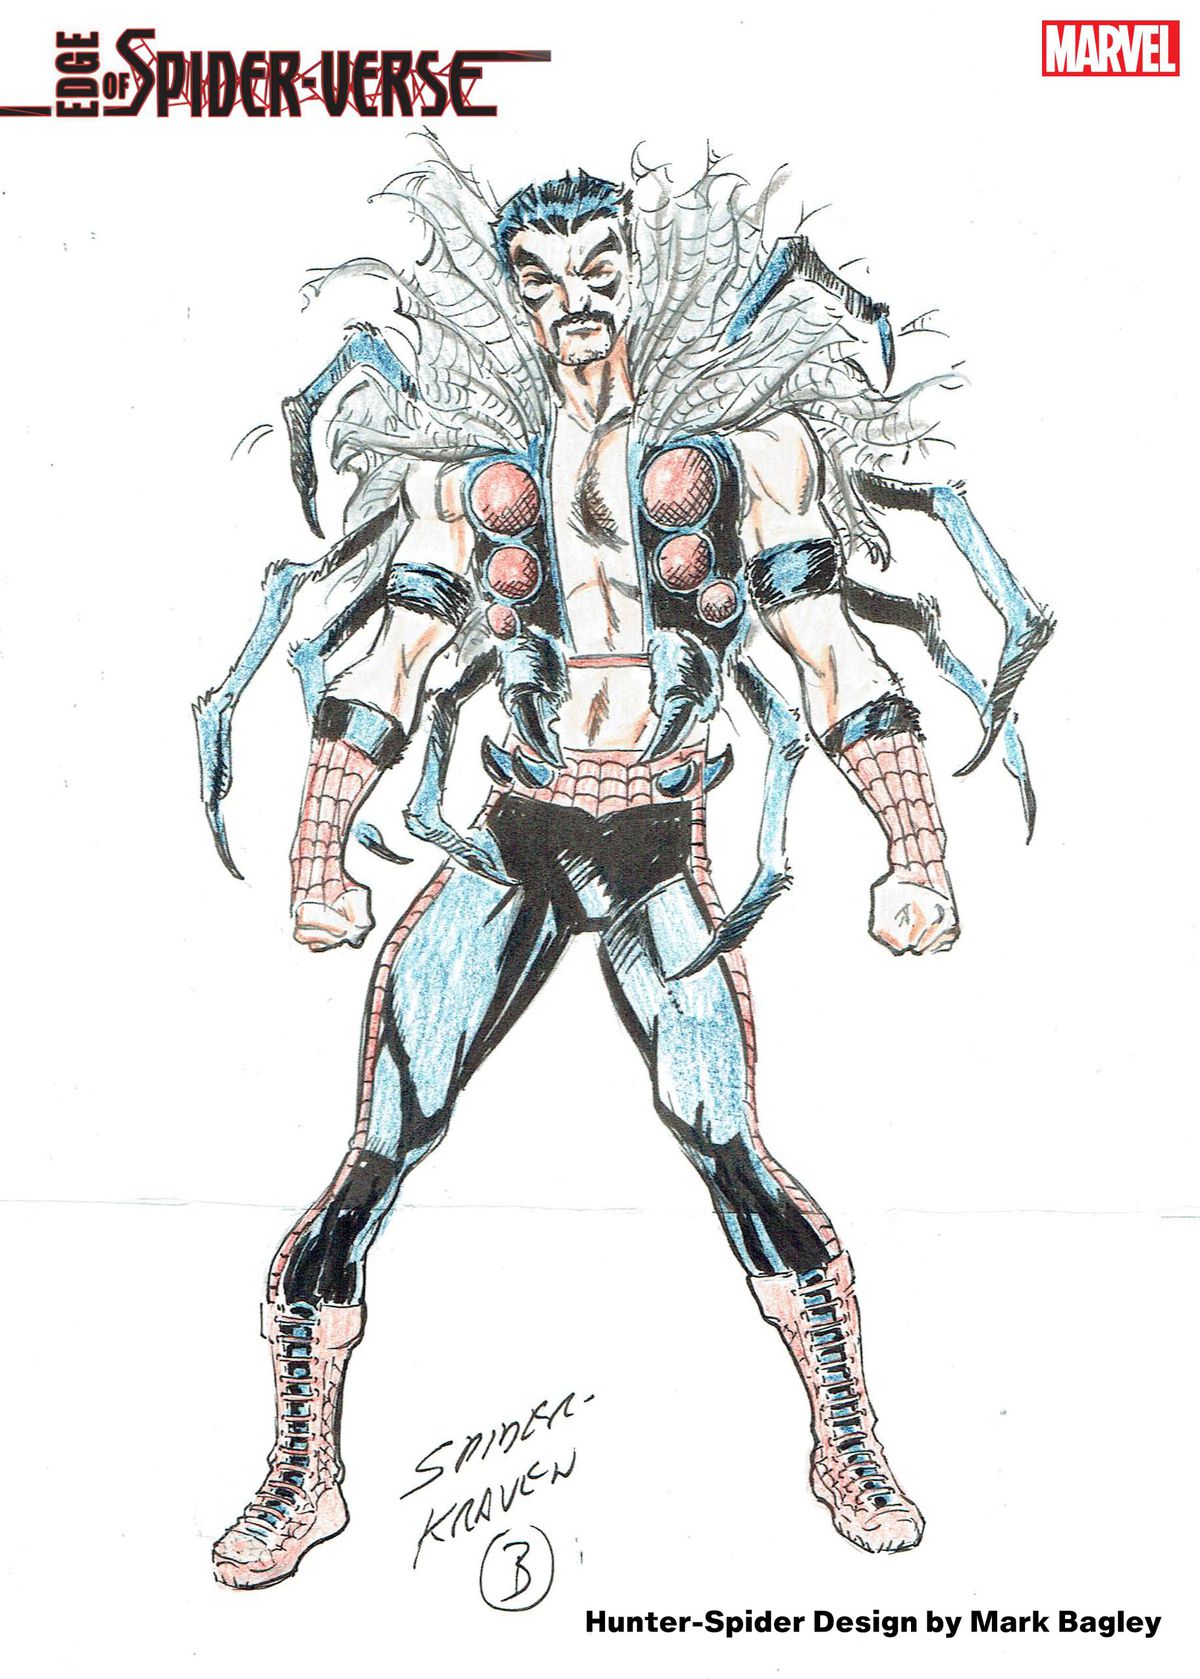 A character design for Hunter-Spider, a heroic version of Kraven the Hunter with spider-powers. He is a mustachioed man wearing the pants and gloves of a Spider-Man costume, and an entire giant spider as an open vest. He is shirtless under the vest. Spiderwebs make a lion-like mane over his shoulders.